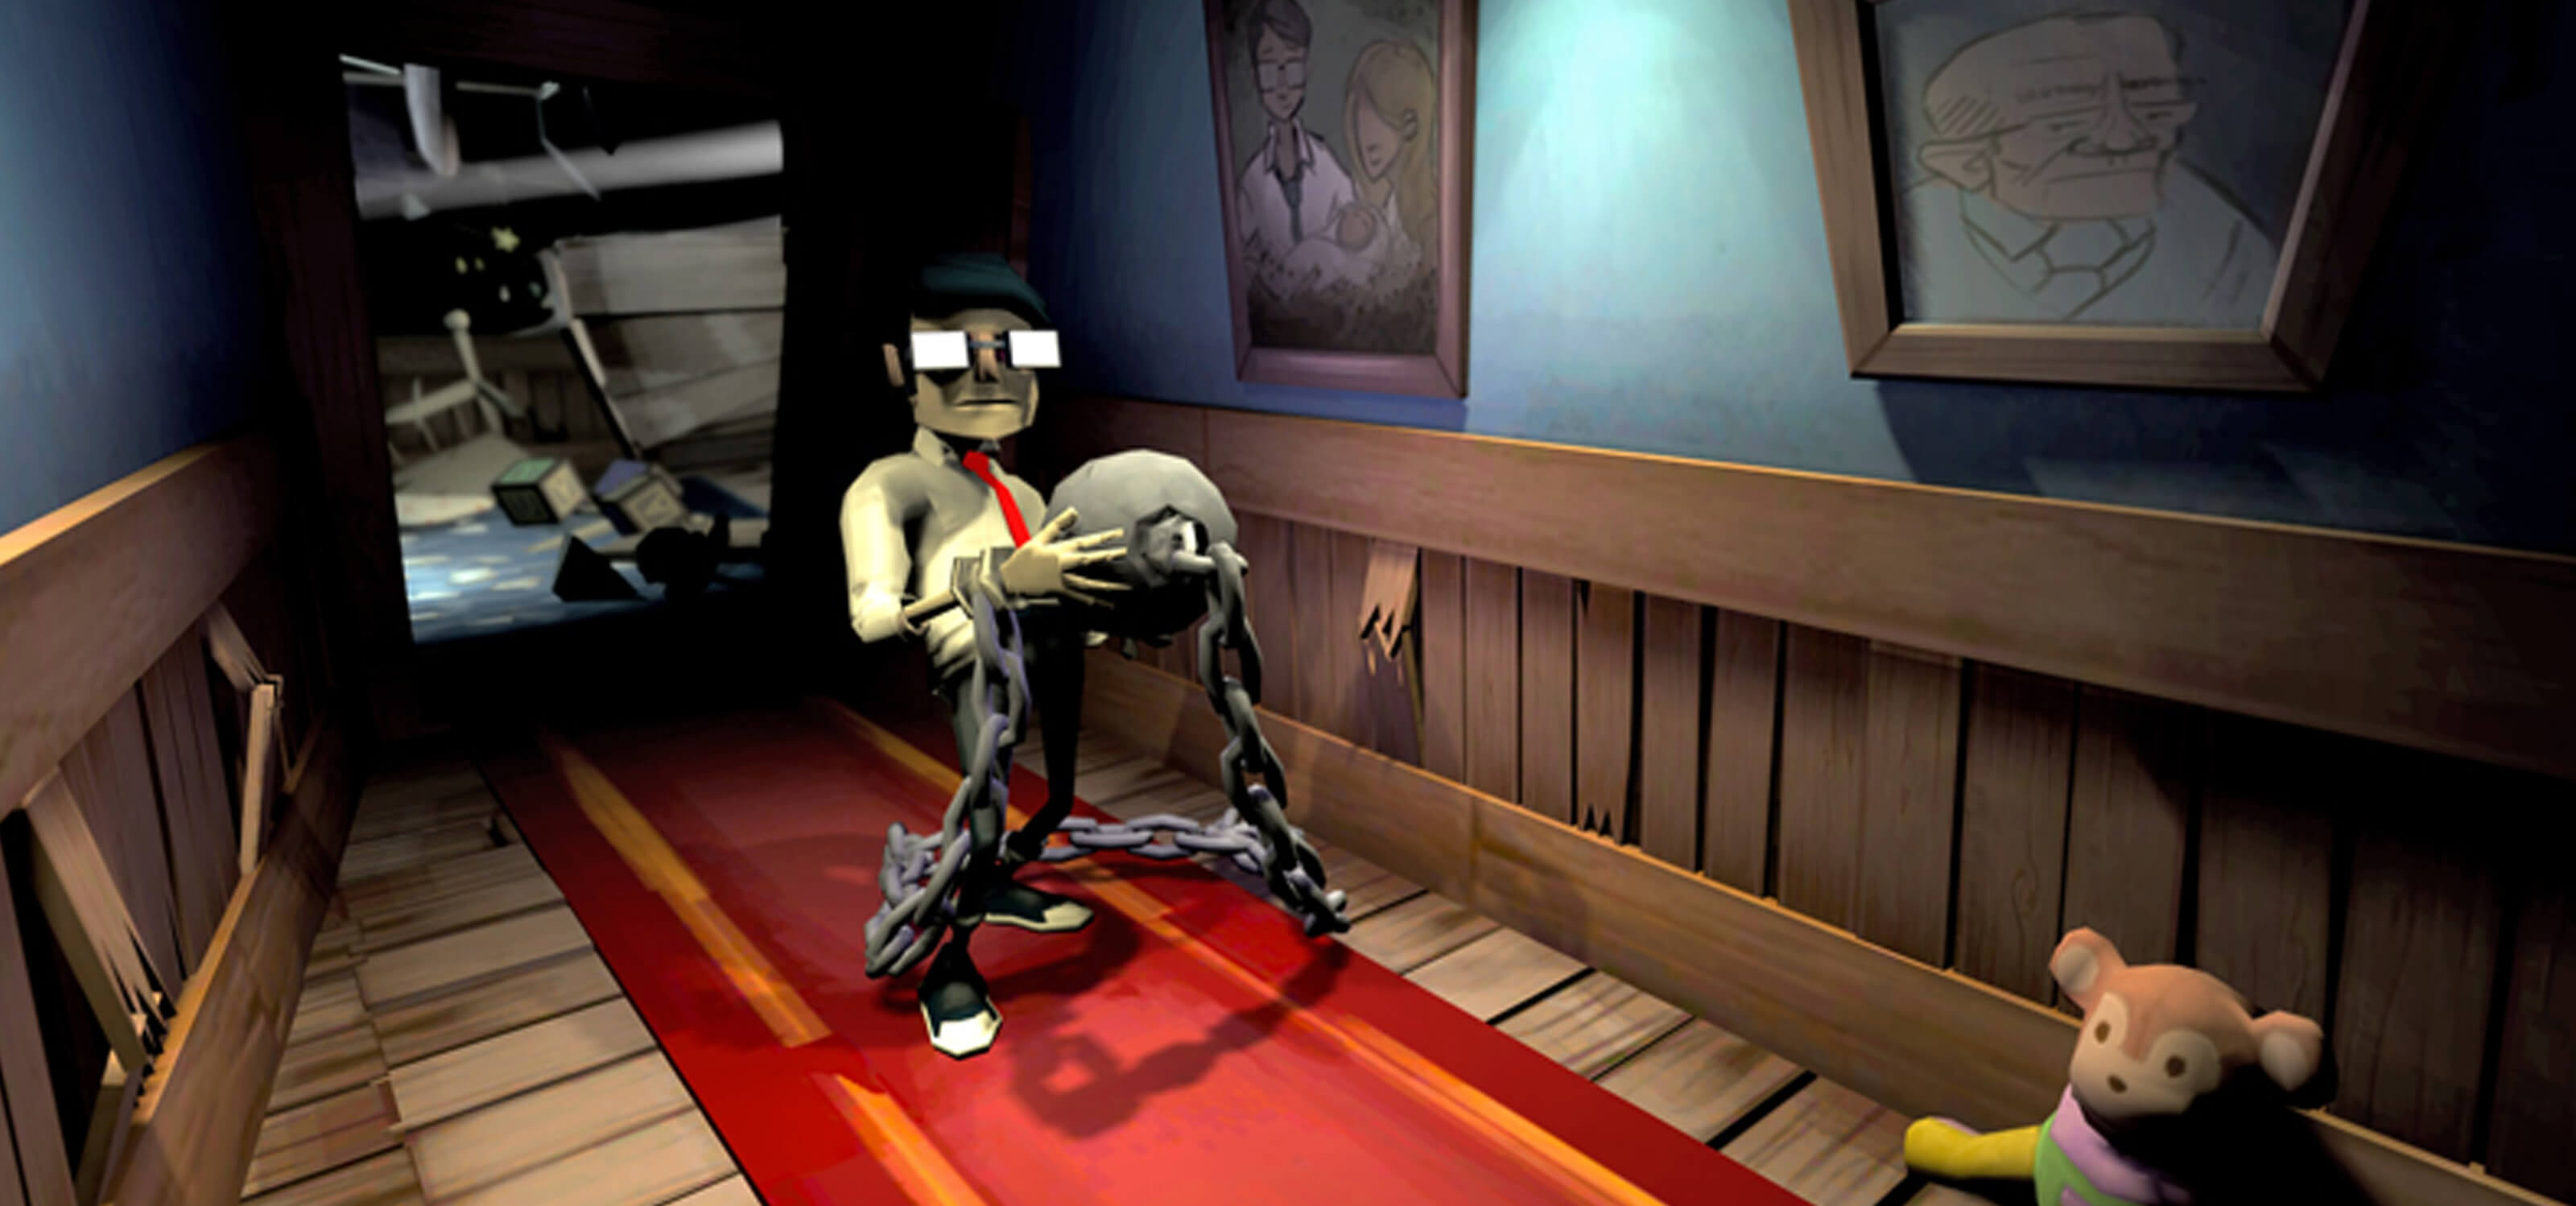 Screenshot from DigiPen student game Chained featuring a young man stumbling down a hallway carrying a ball and chain